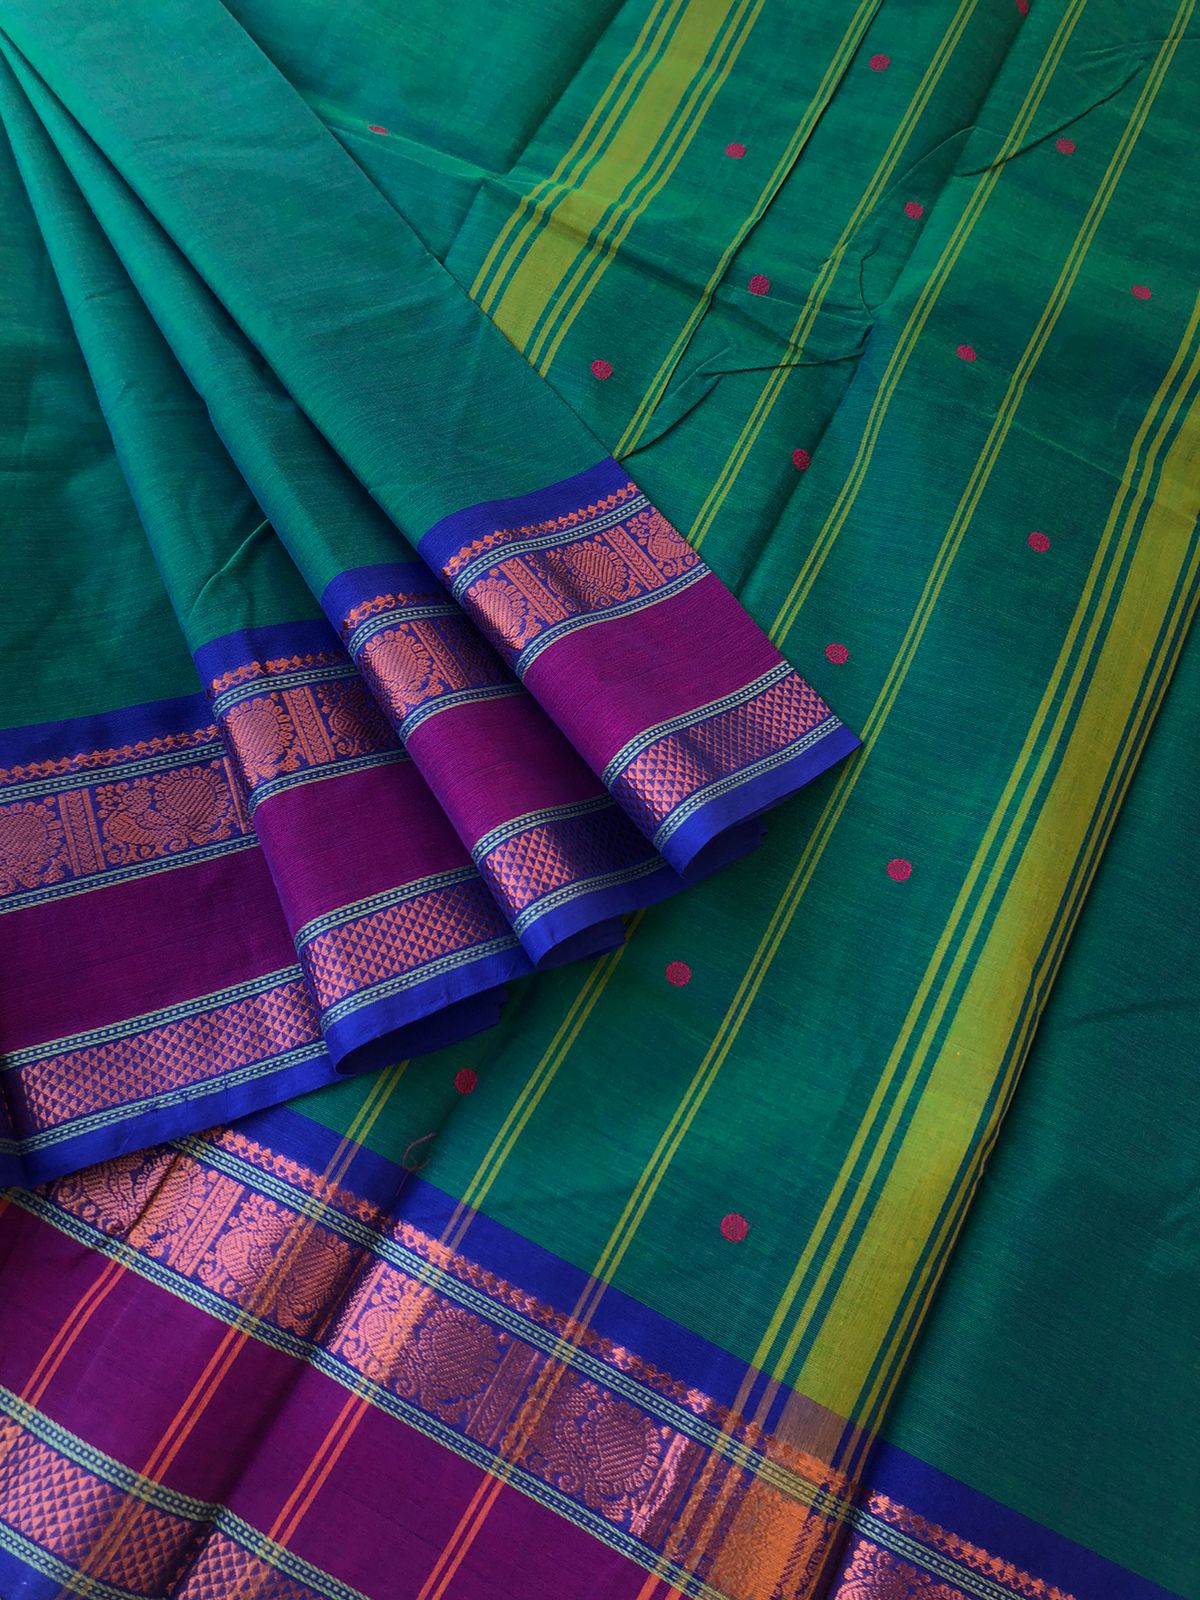 Kanchi X Chettinad - dual tone emerald green with a touch of blue